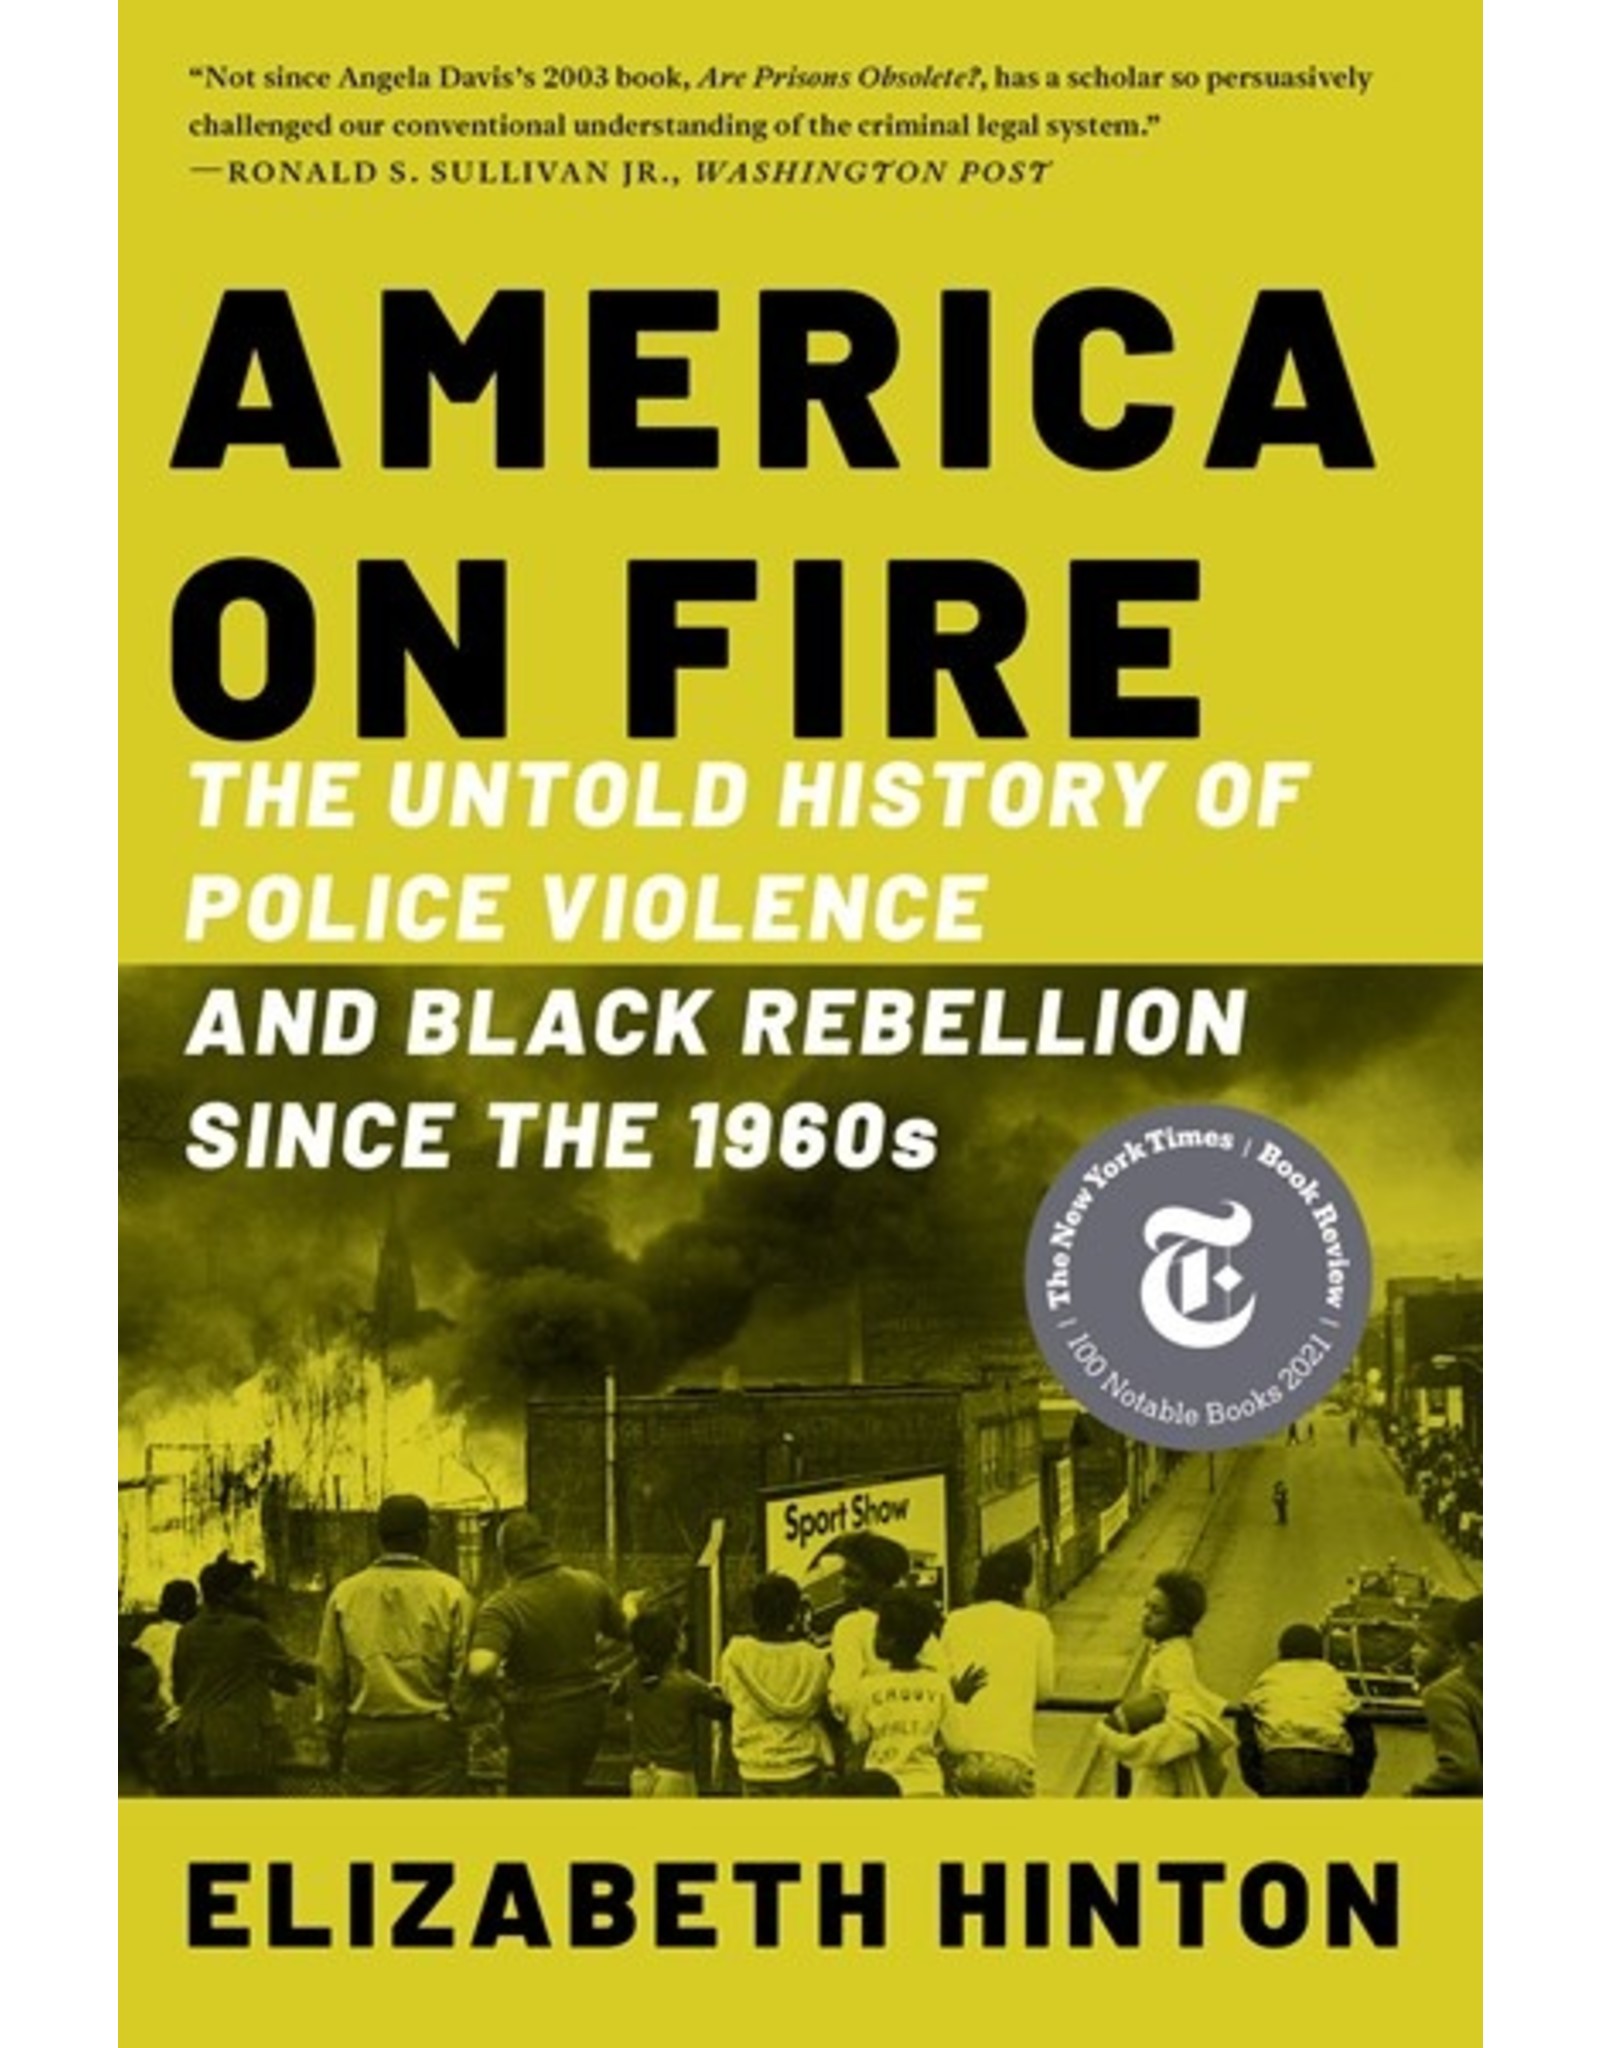 Books America on Fire: The Untold History of Police Violence and Black Rebellion Since 1960's